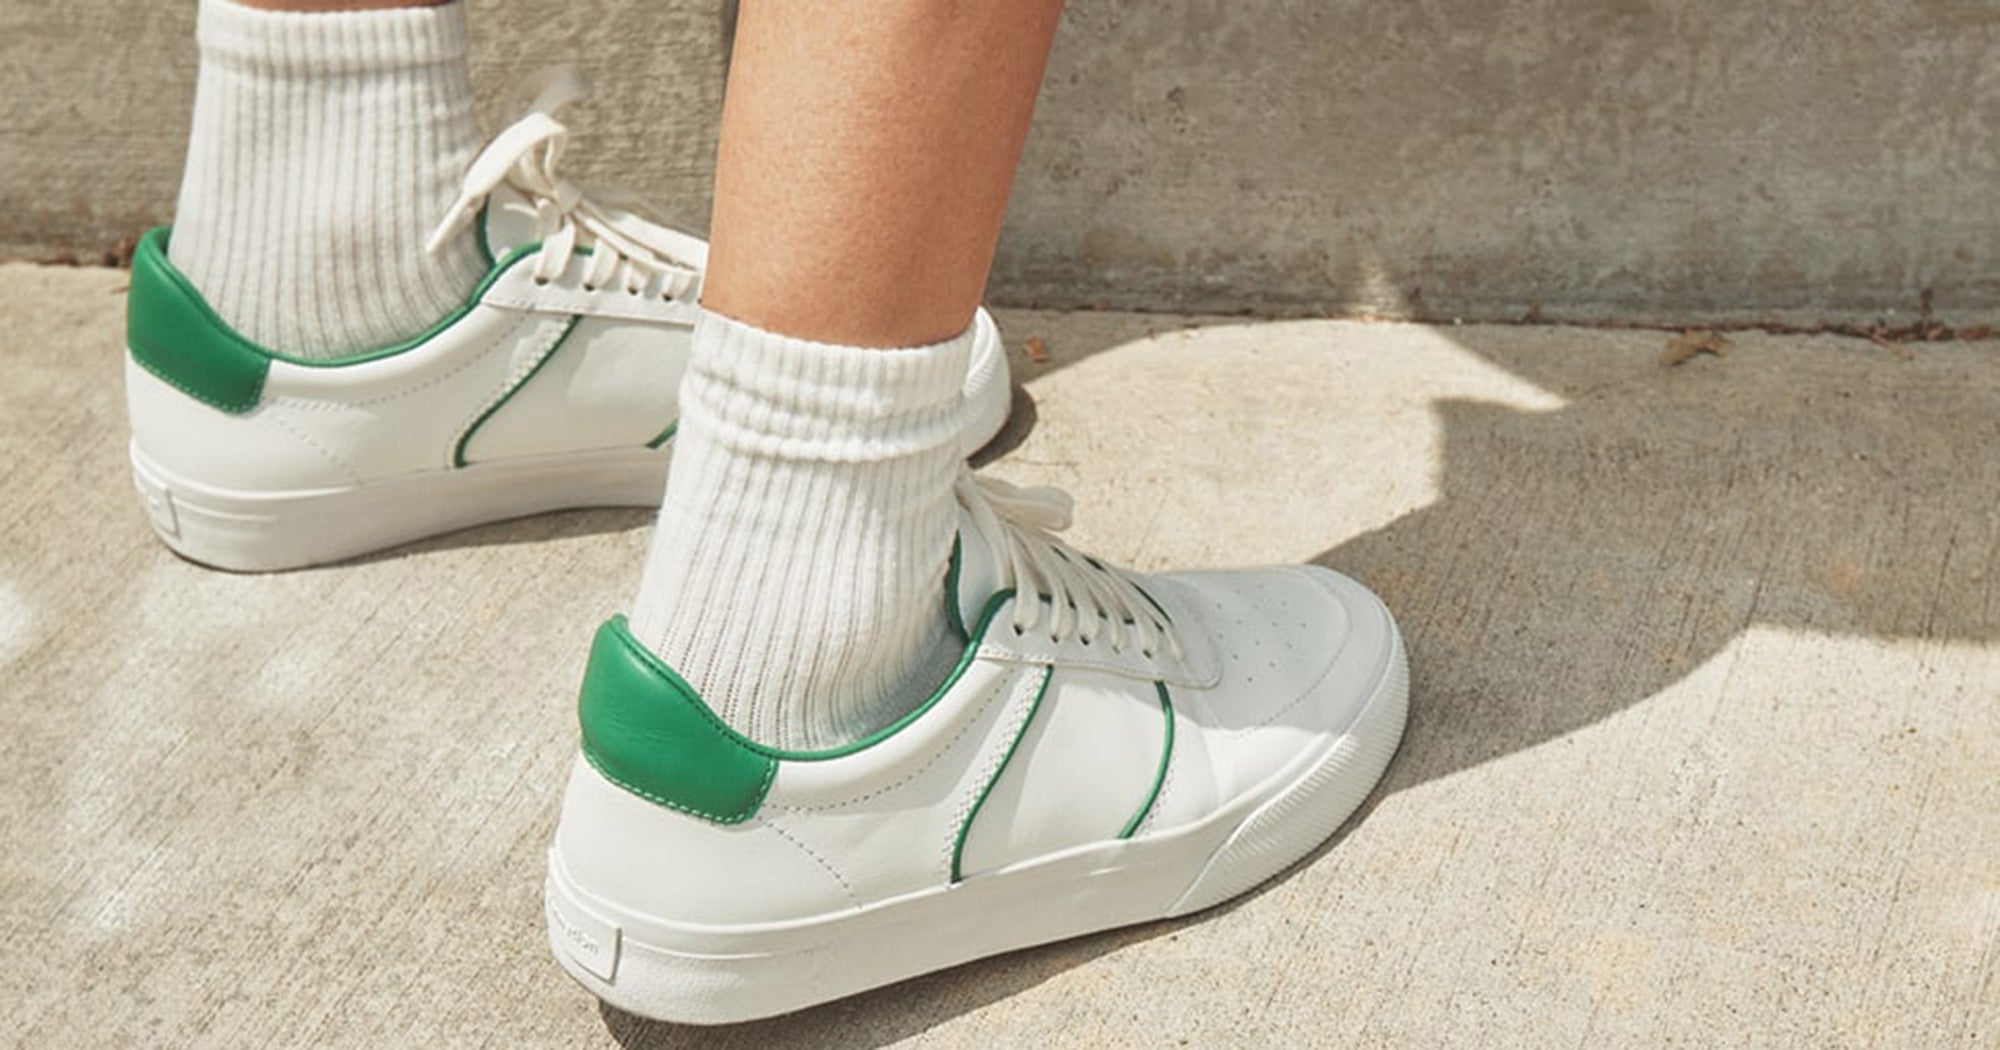 Reformation Launches A Fully Recyclable Sneaker